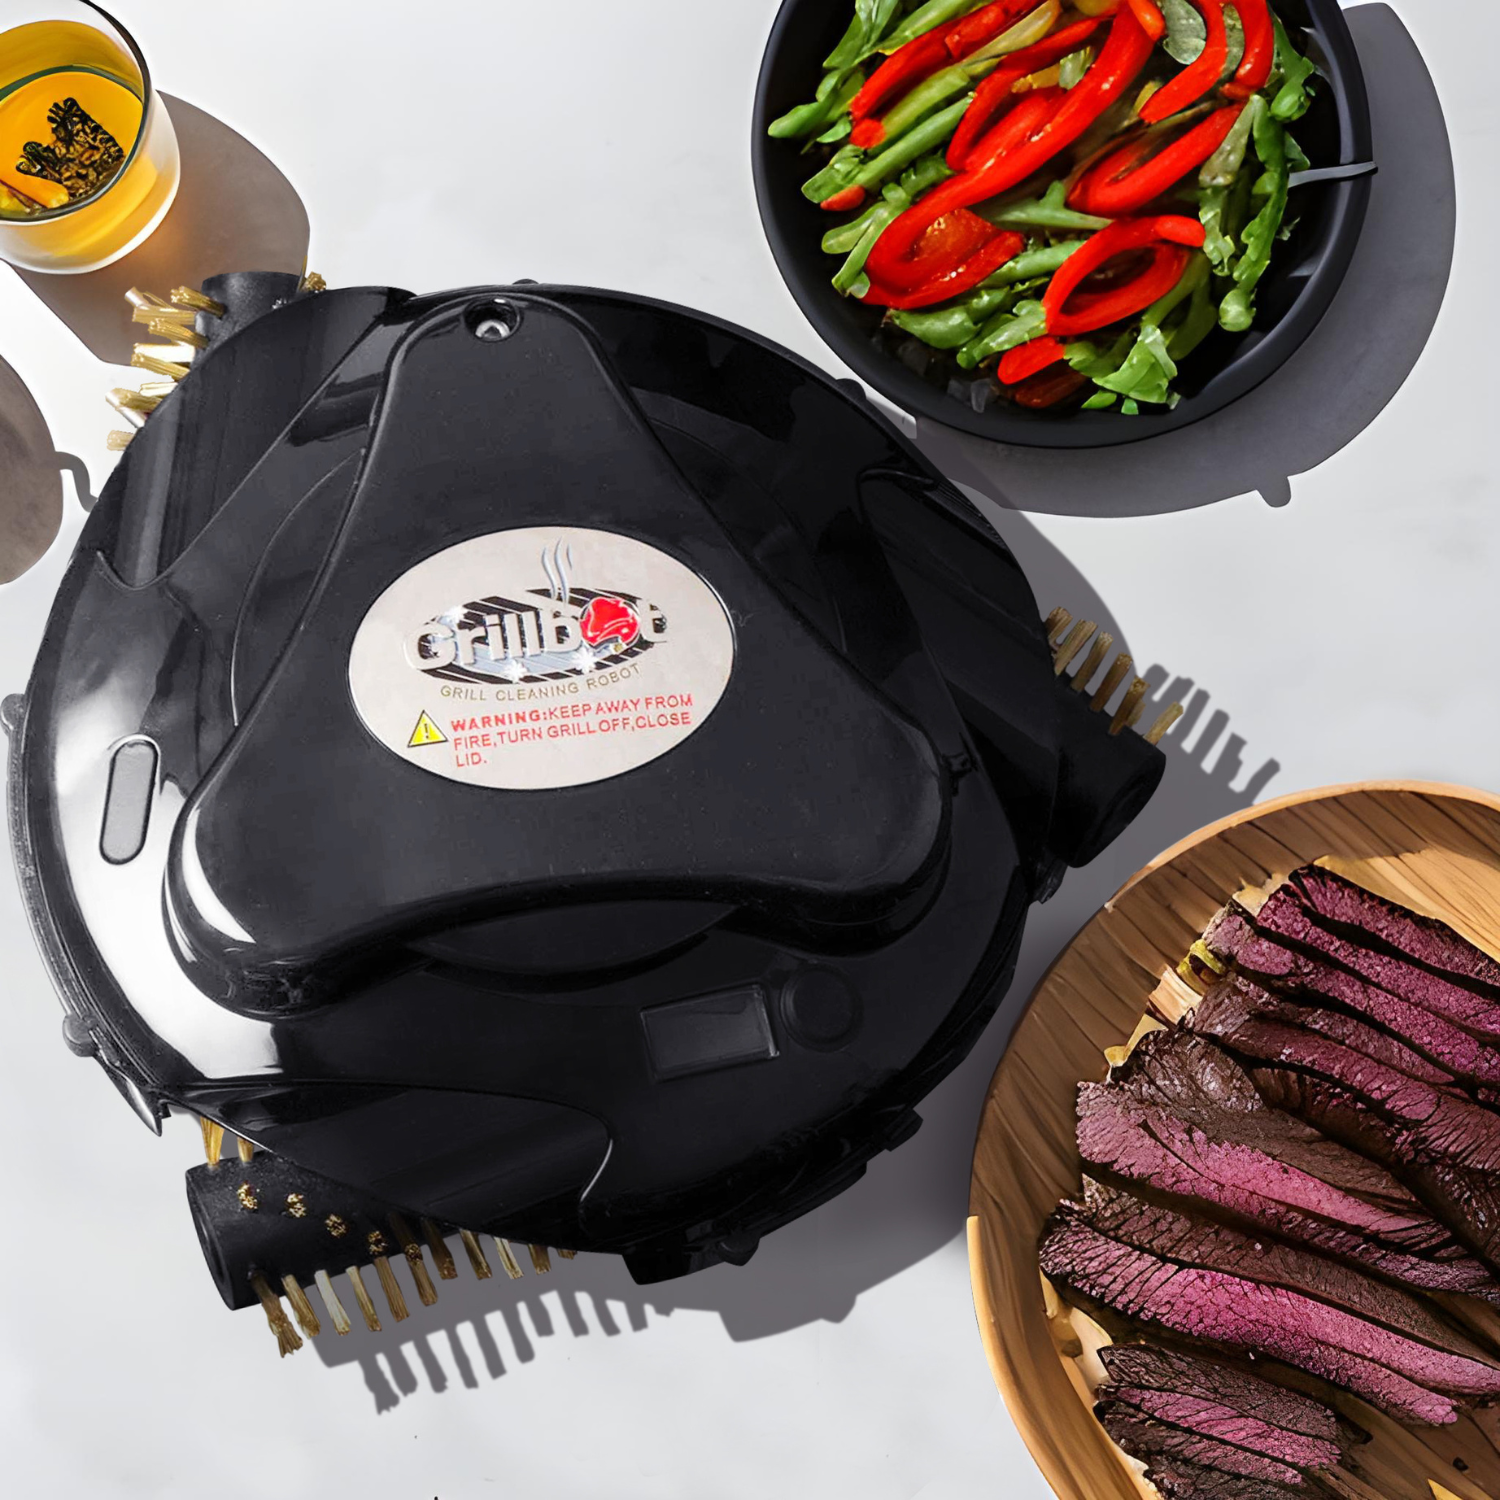 Grillbot Black:  Automatic Grill Cleaning Robot